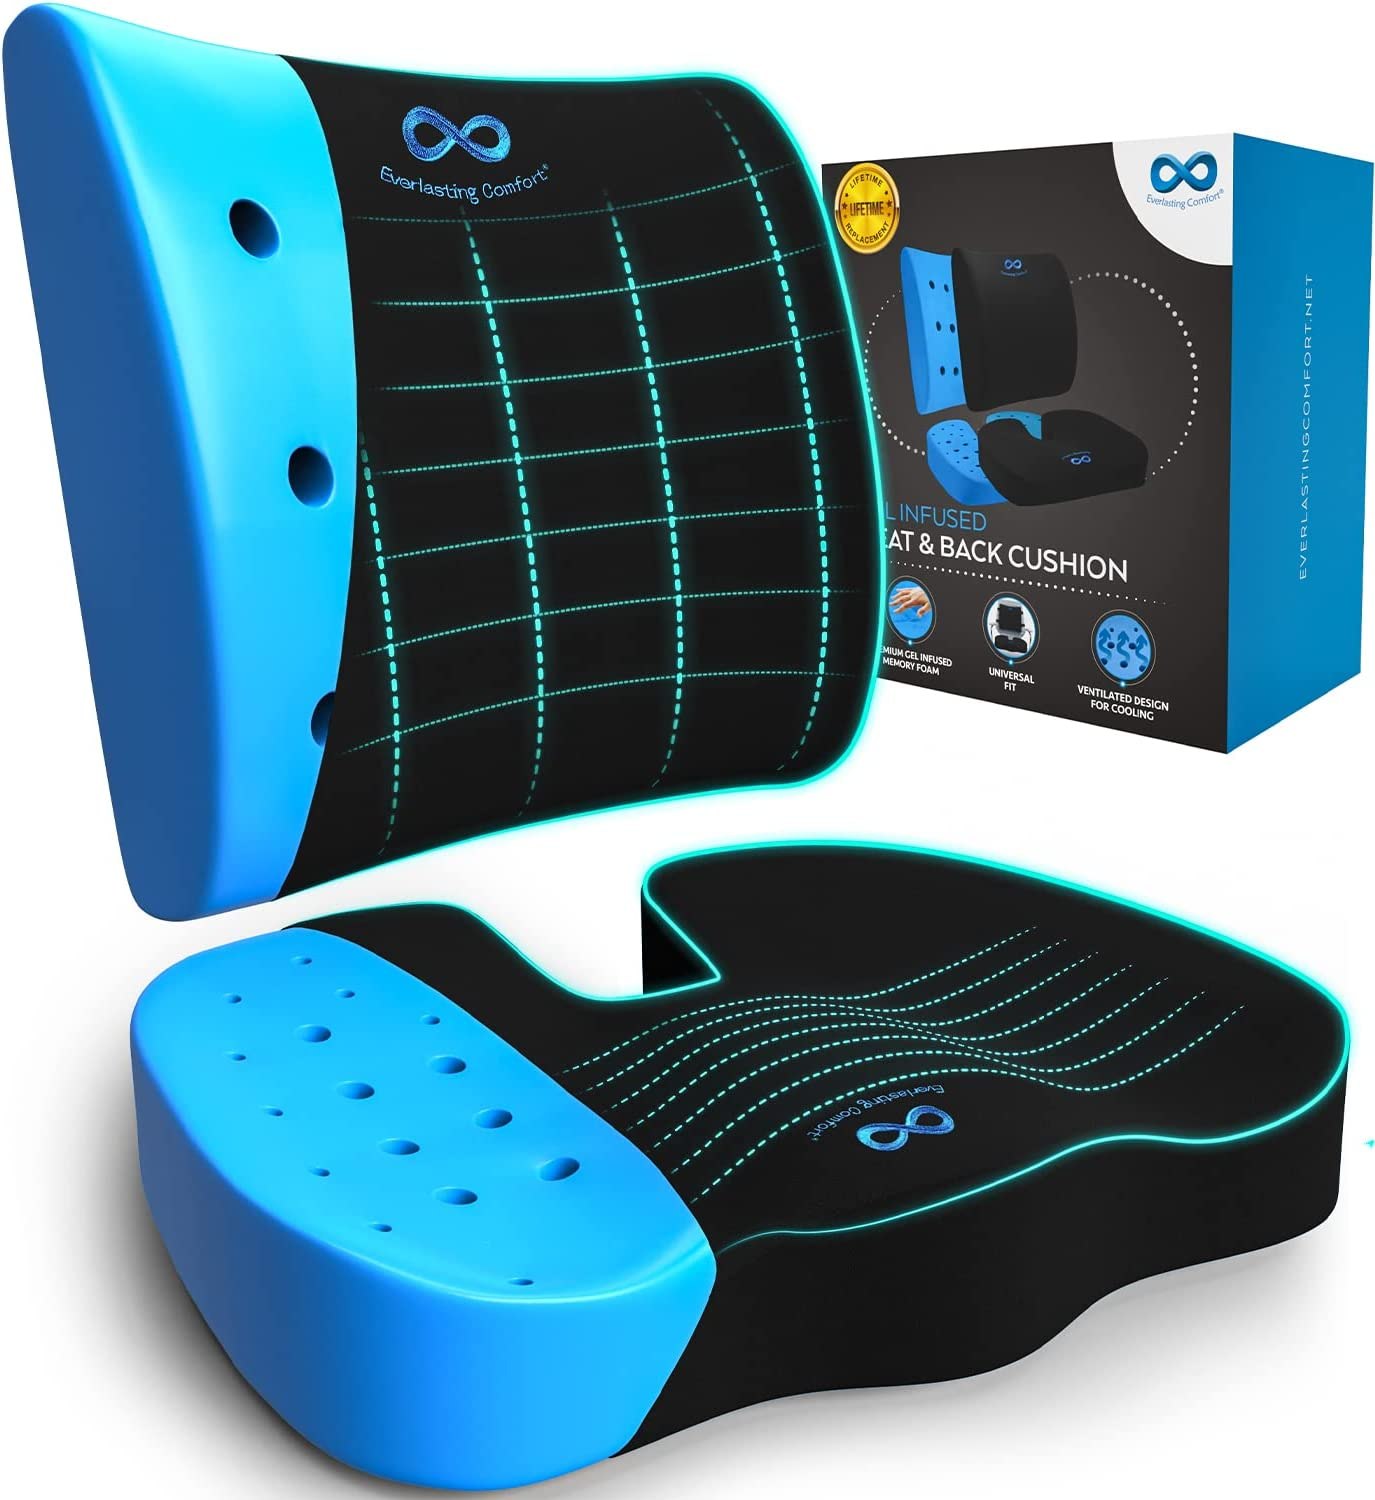 THE ERGONOMIC SEAT CUSHION (60% OFF TODAY!) – CNK SHOPY